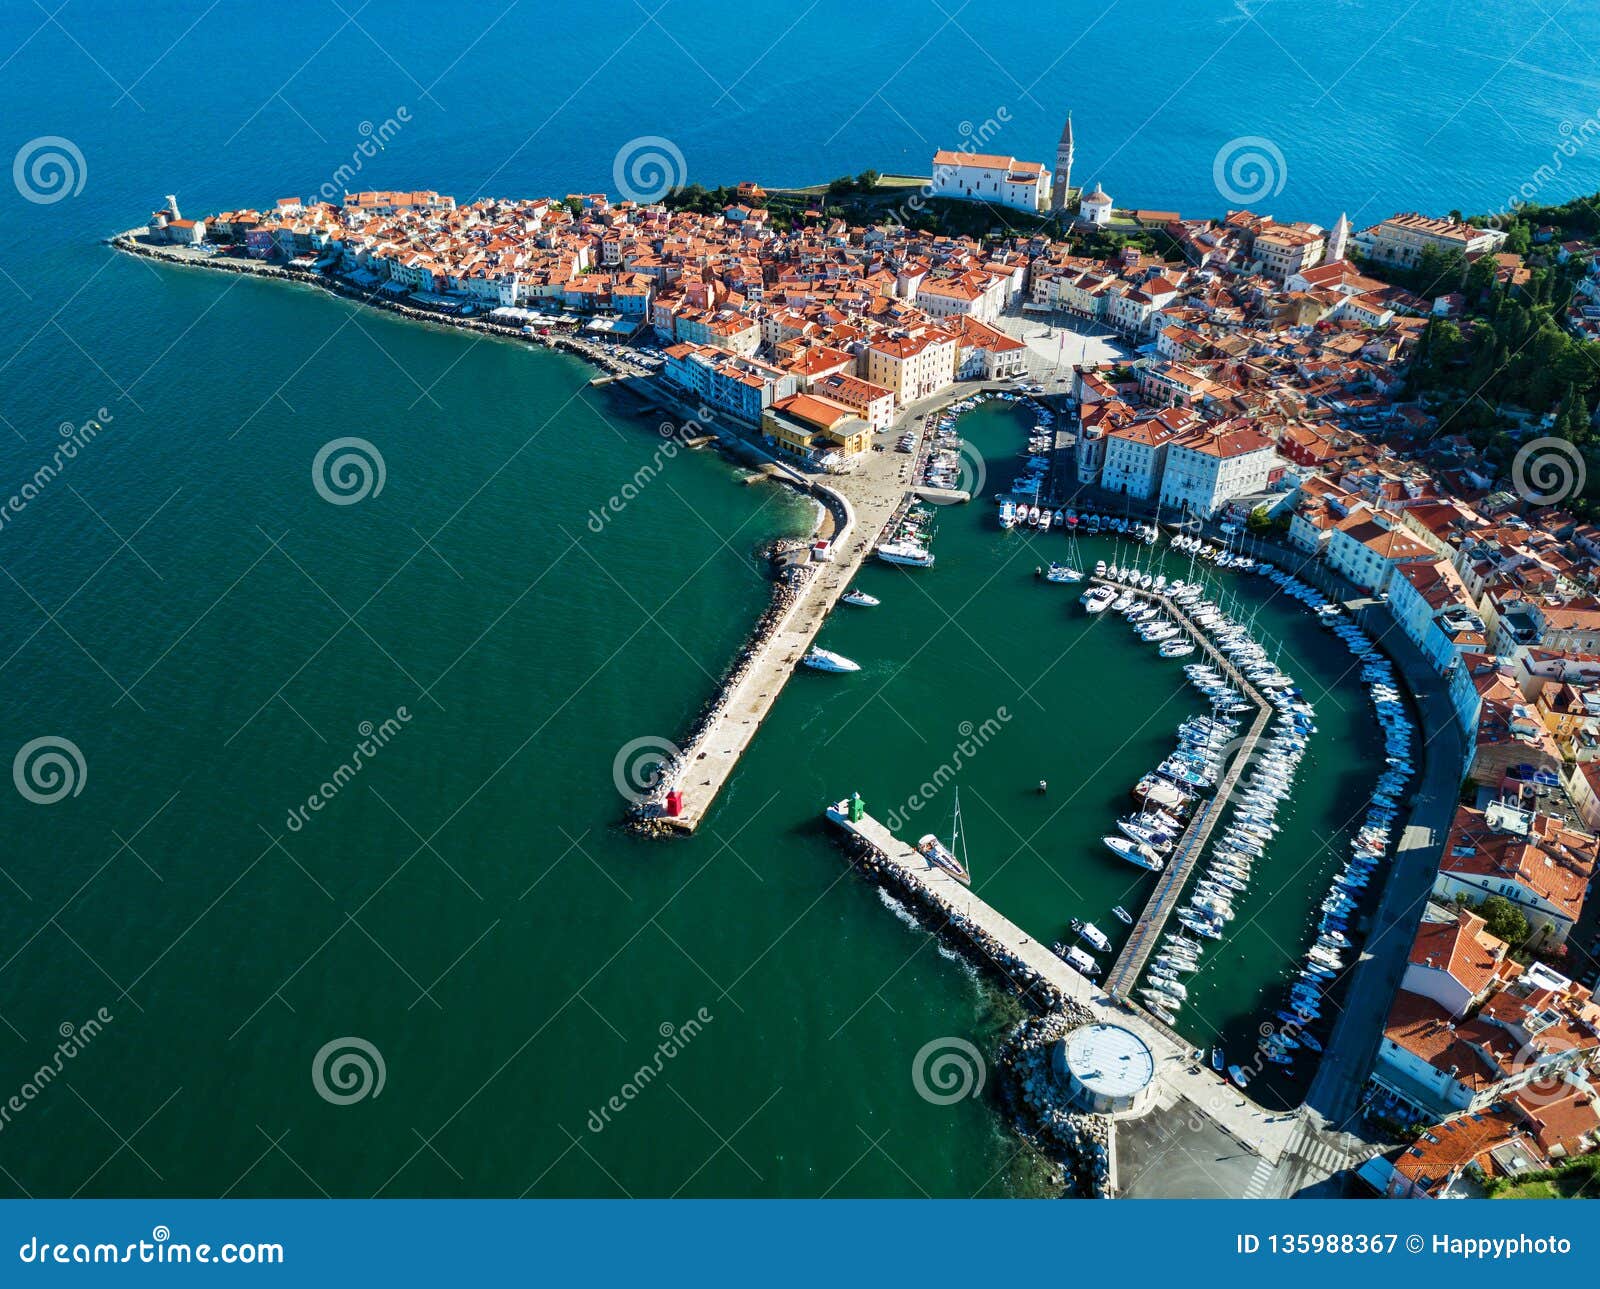 old city piran in slovenia, aerial morning view.